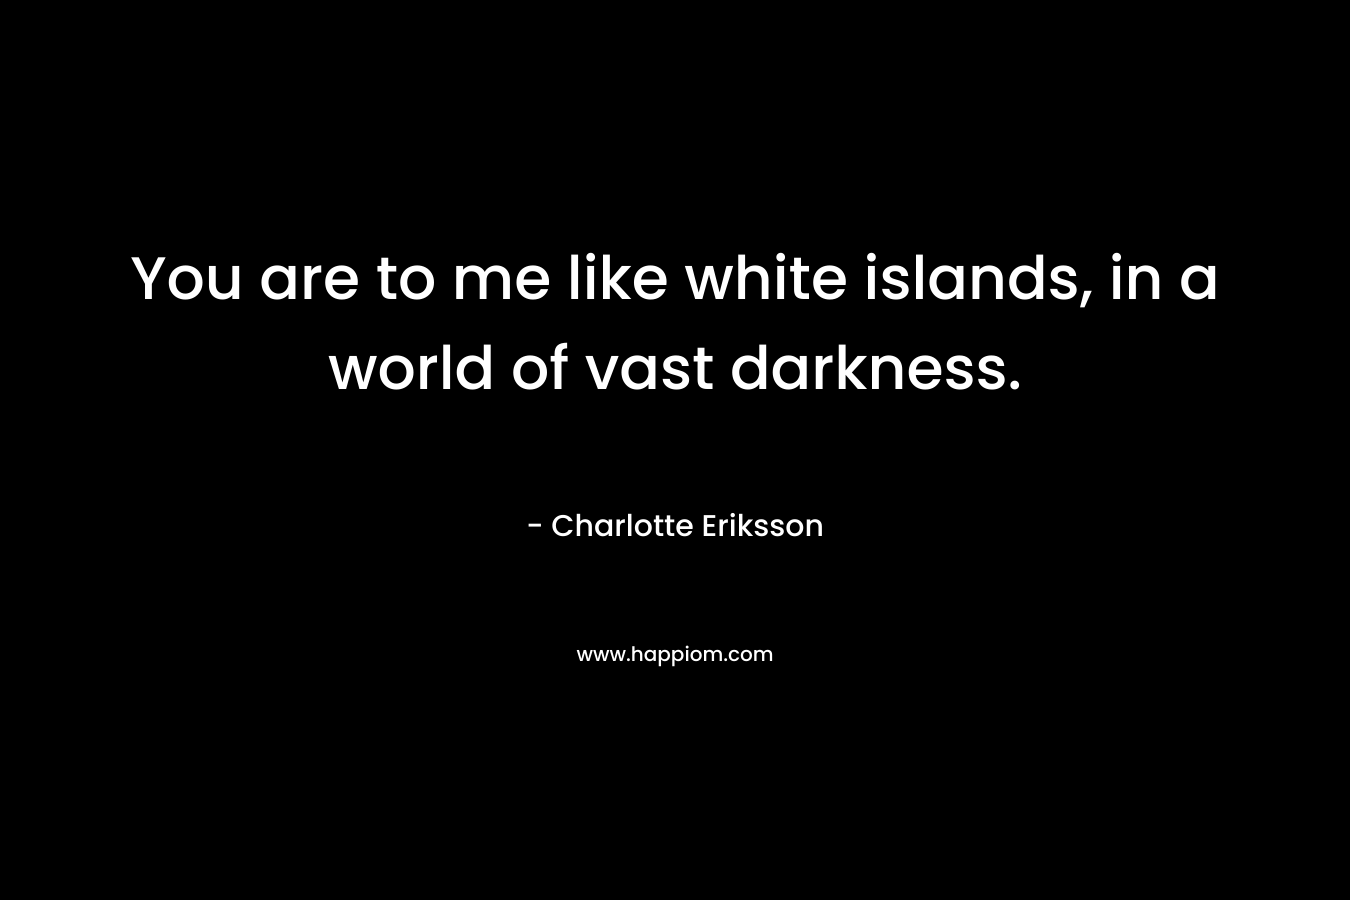 You are to me like white islands, in a world of vast darkness.